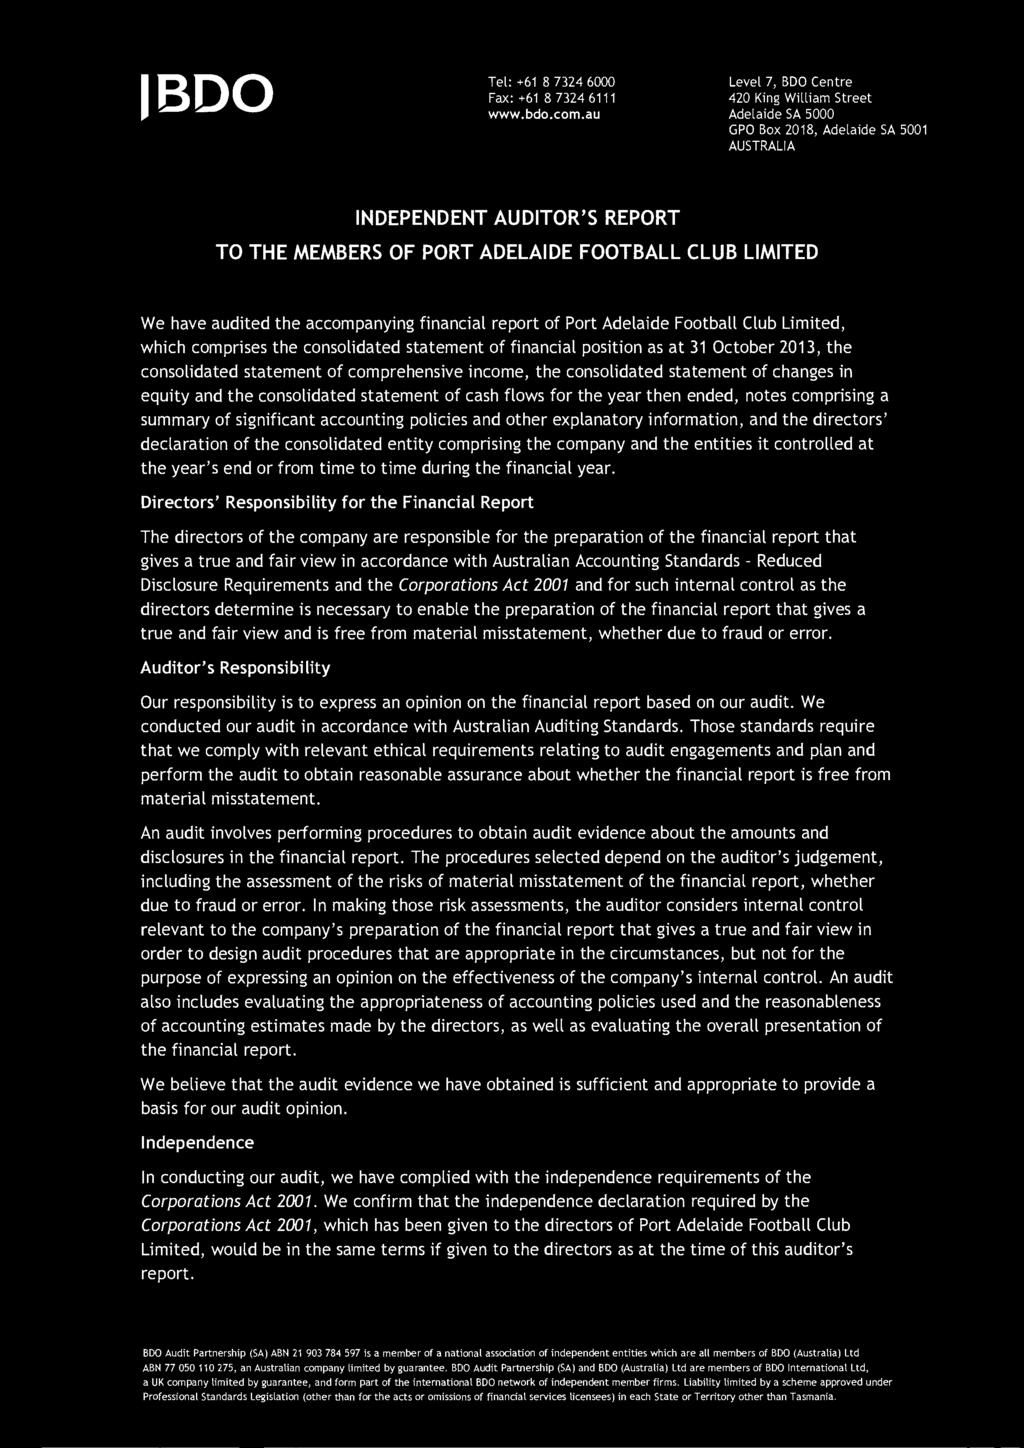 audited the accompanying financial report of Port Adelaide Football Club Limited, which comprises the consolidated statement of financial position as at 31 October 2013, the consolidated statement of